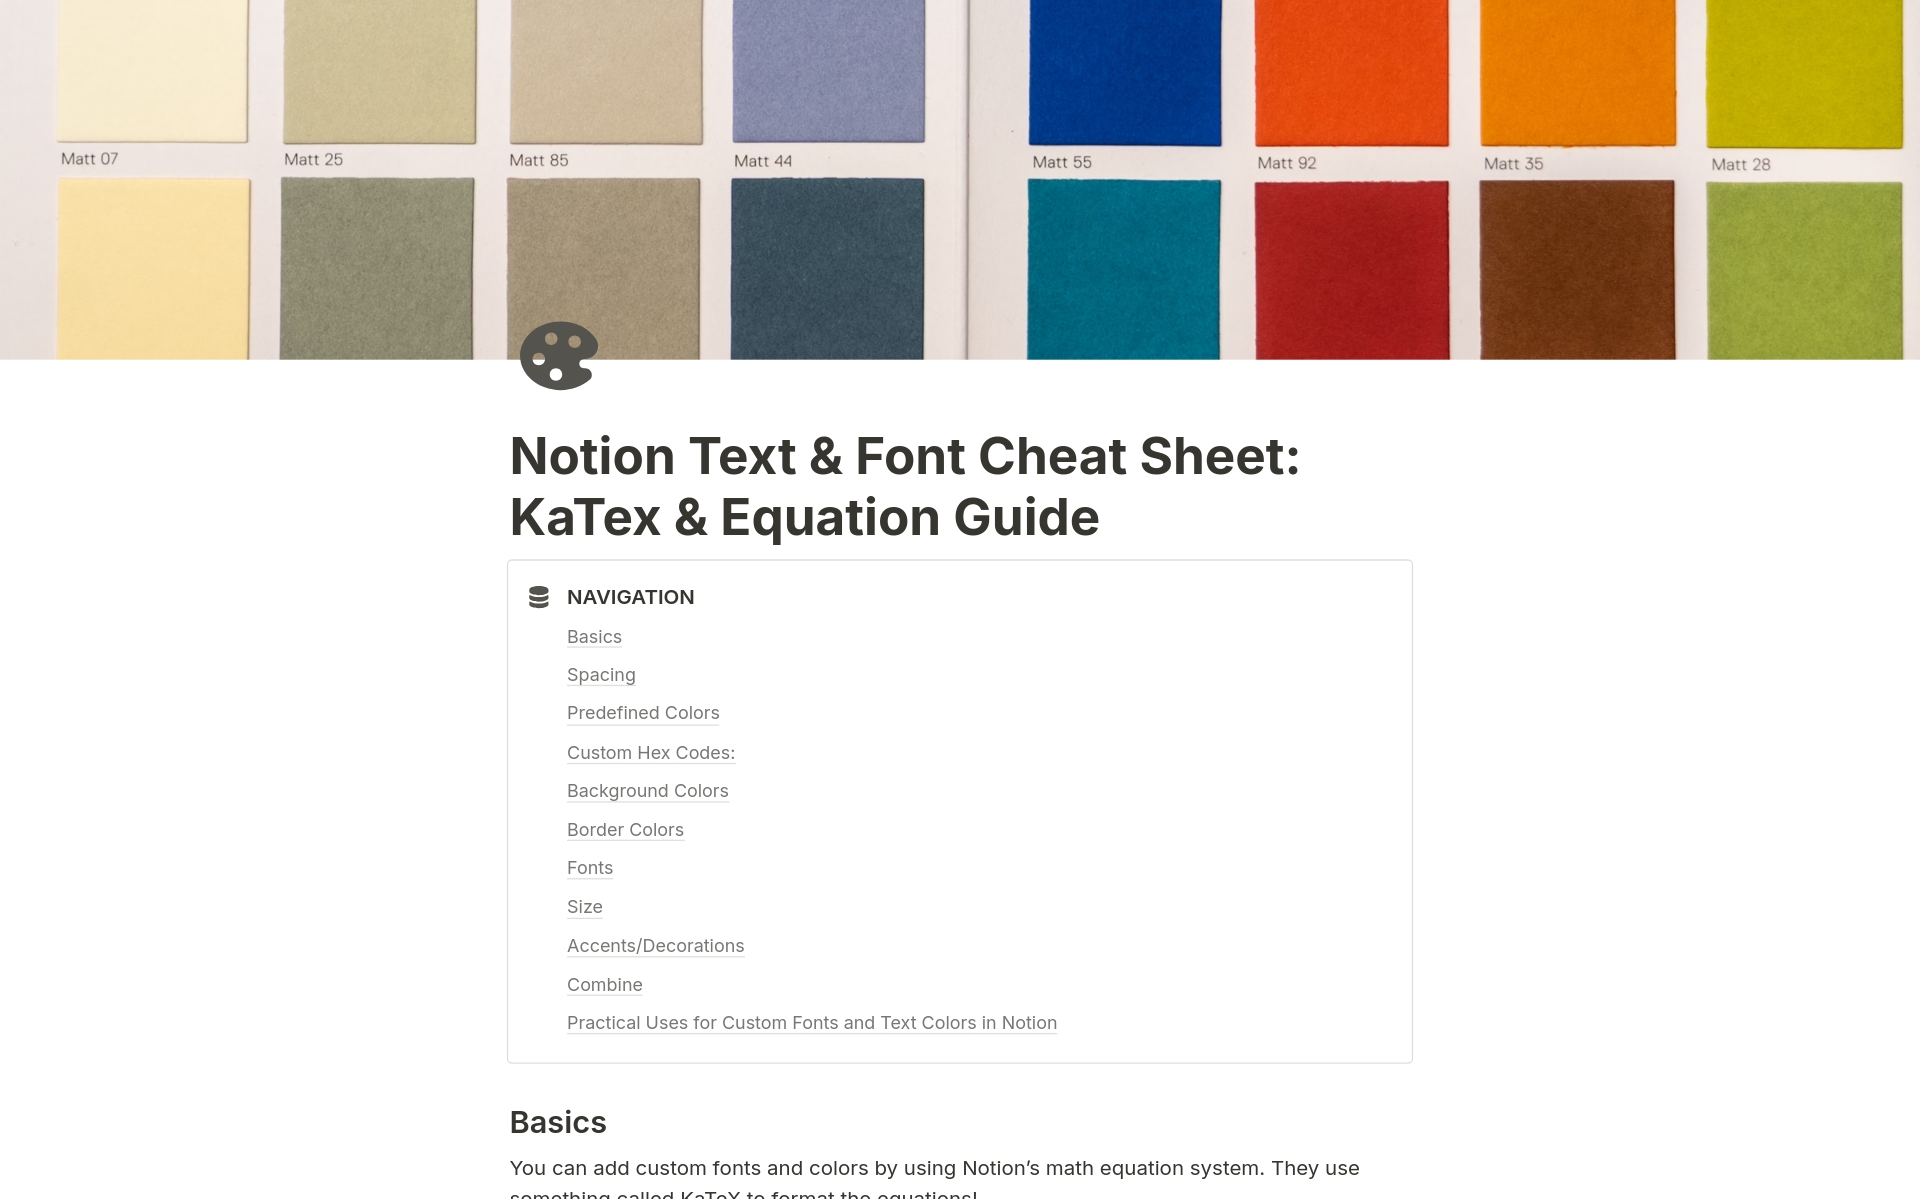 🎨 Want to add a splash of color and excitement to your Notion workspace?
If you are getting bored of Notion's default fonts, this guide is for you! We will show you how to add endless color options and custom font styles for your text using Notion’s math equation. 
